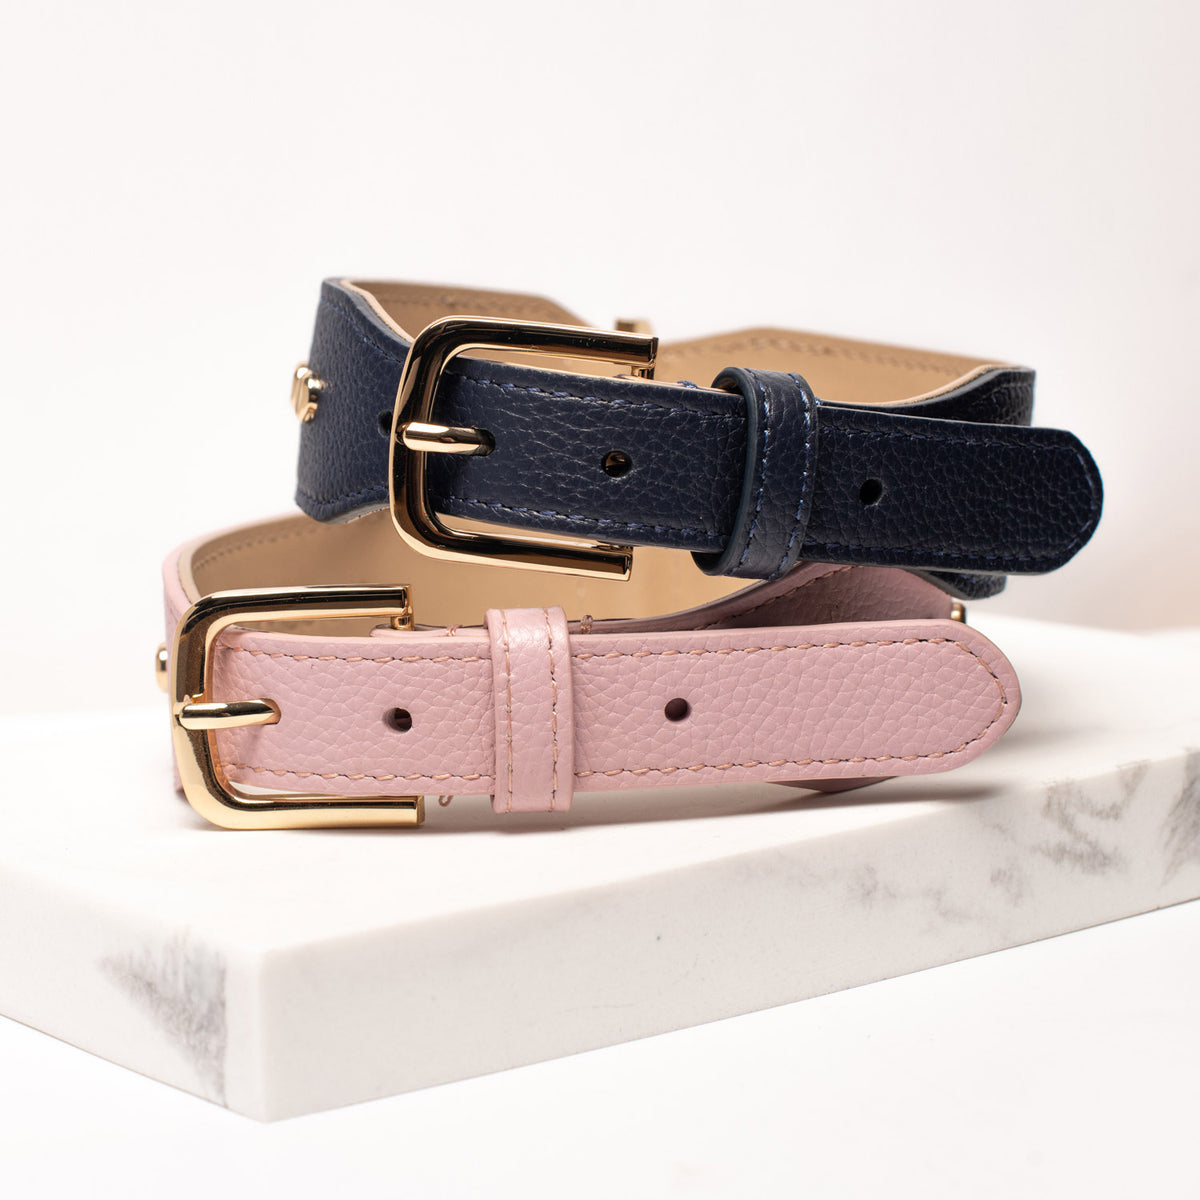 Rufus & Coco's Berlin Rose leather dog collar is made from 100% quality leather. Each collar is finished with premium gold hardware and studs for style and durability. The Rose leather dog collar is available in 4 sizes.